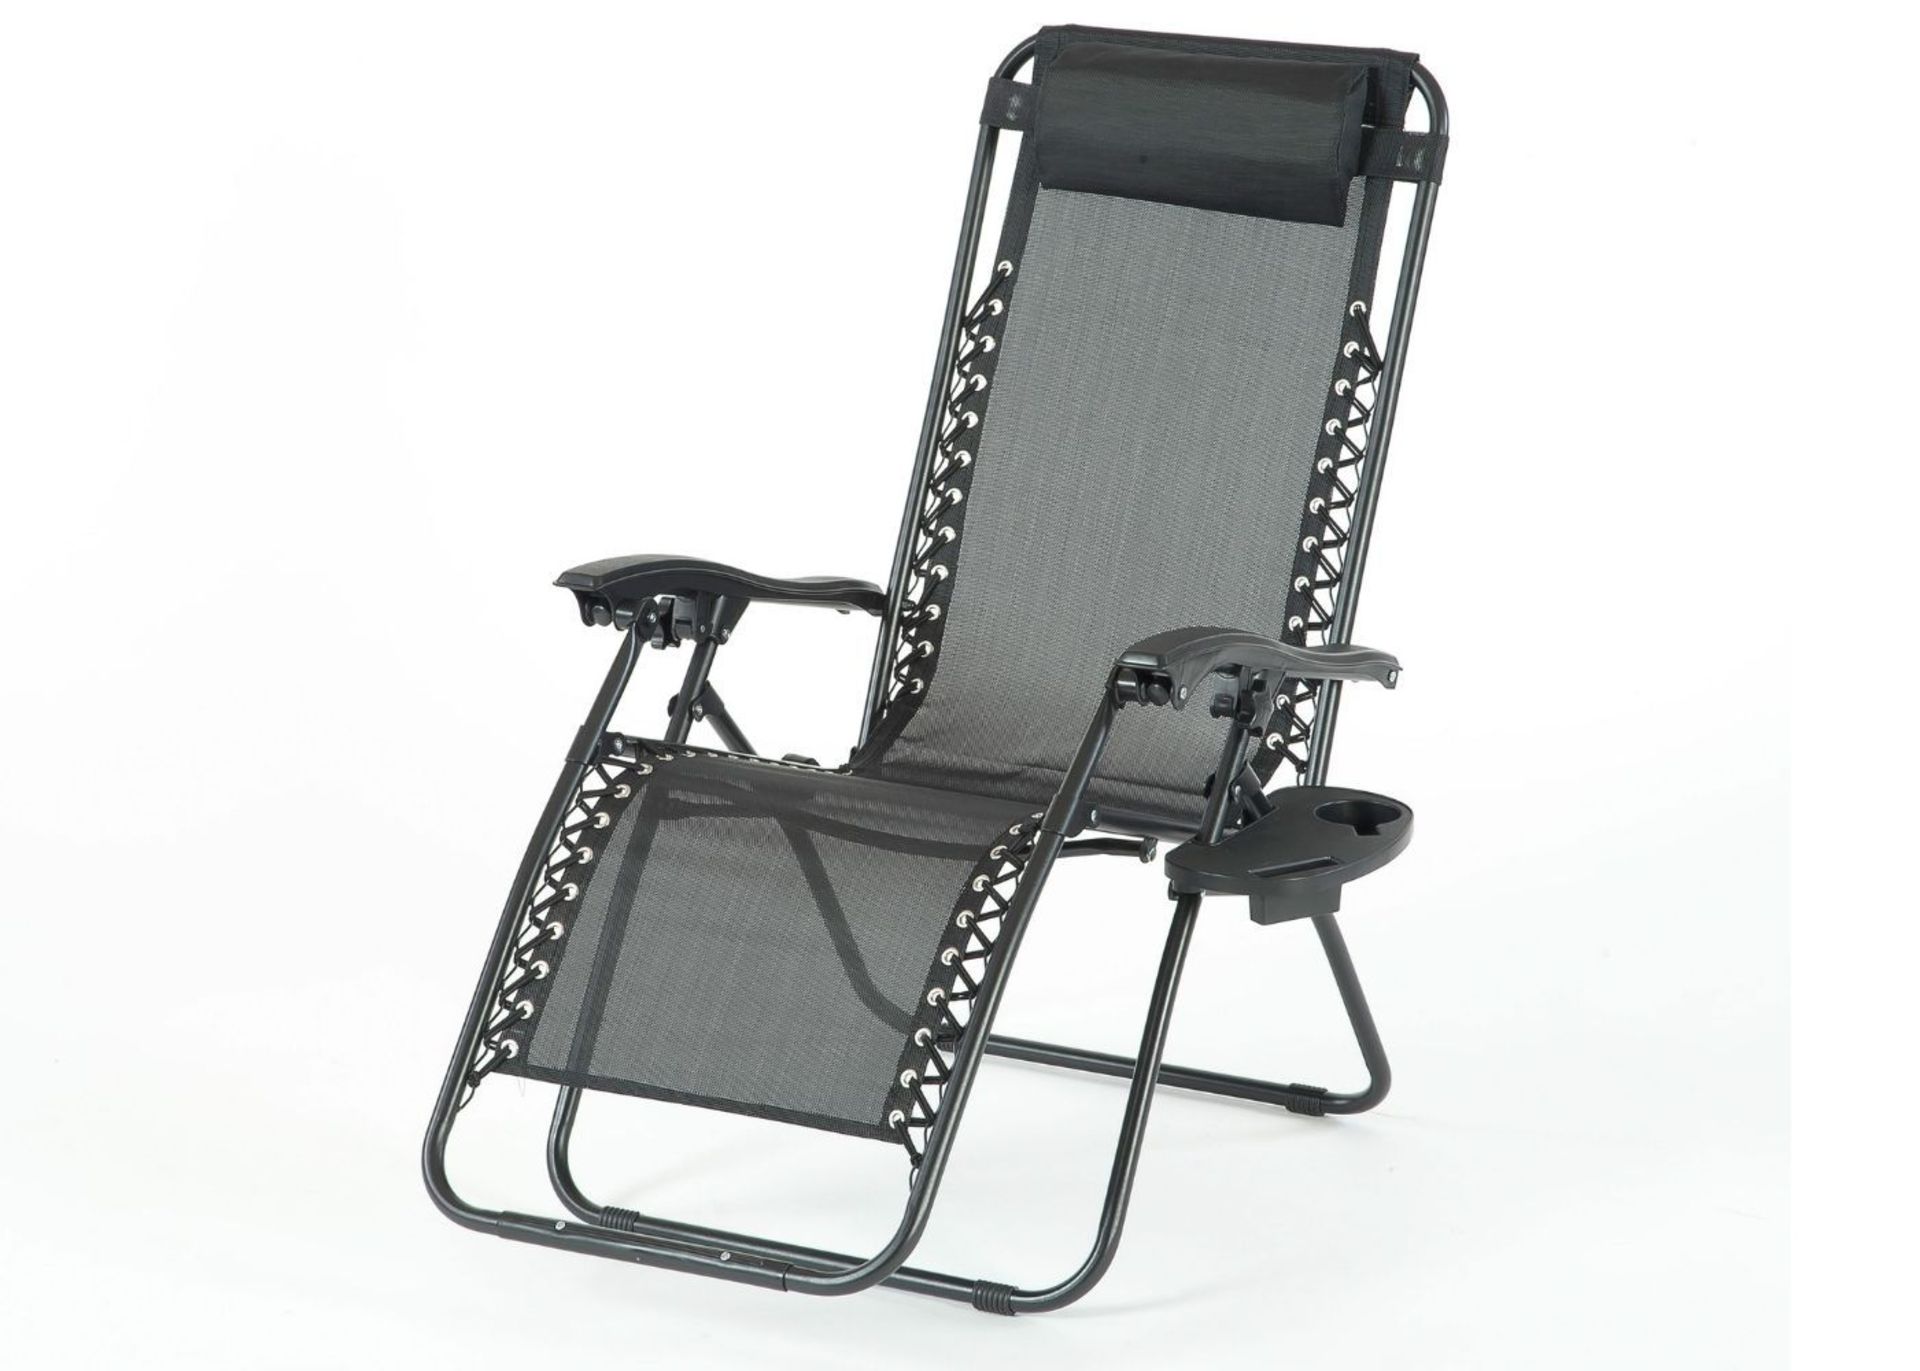 BLACK ROYALE RELAXER W/ CUP HOLDER GARDEN CHAIR BRAND NEW RRP £99